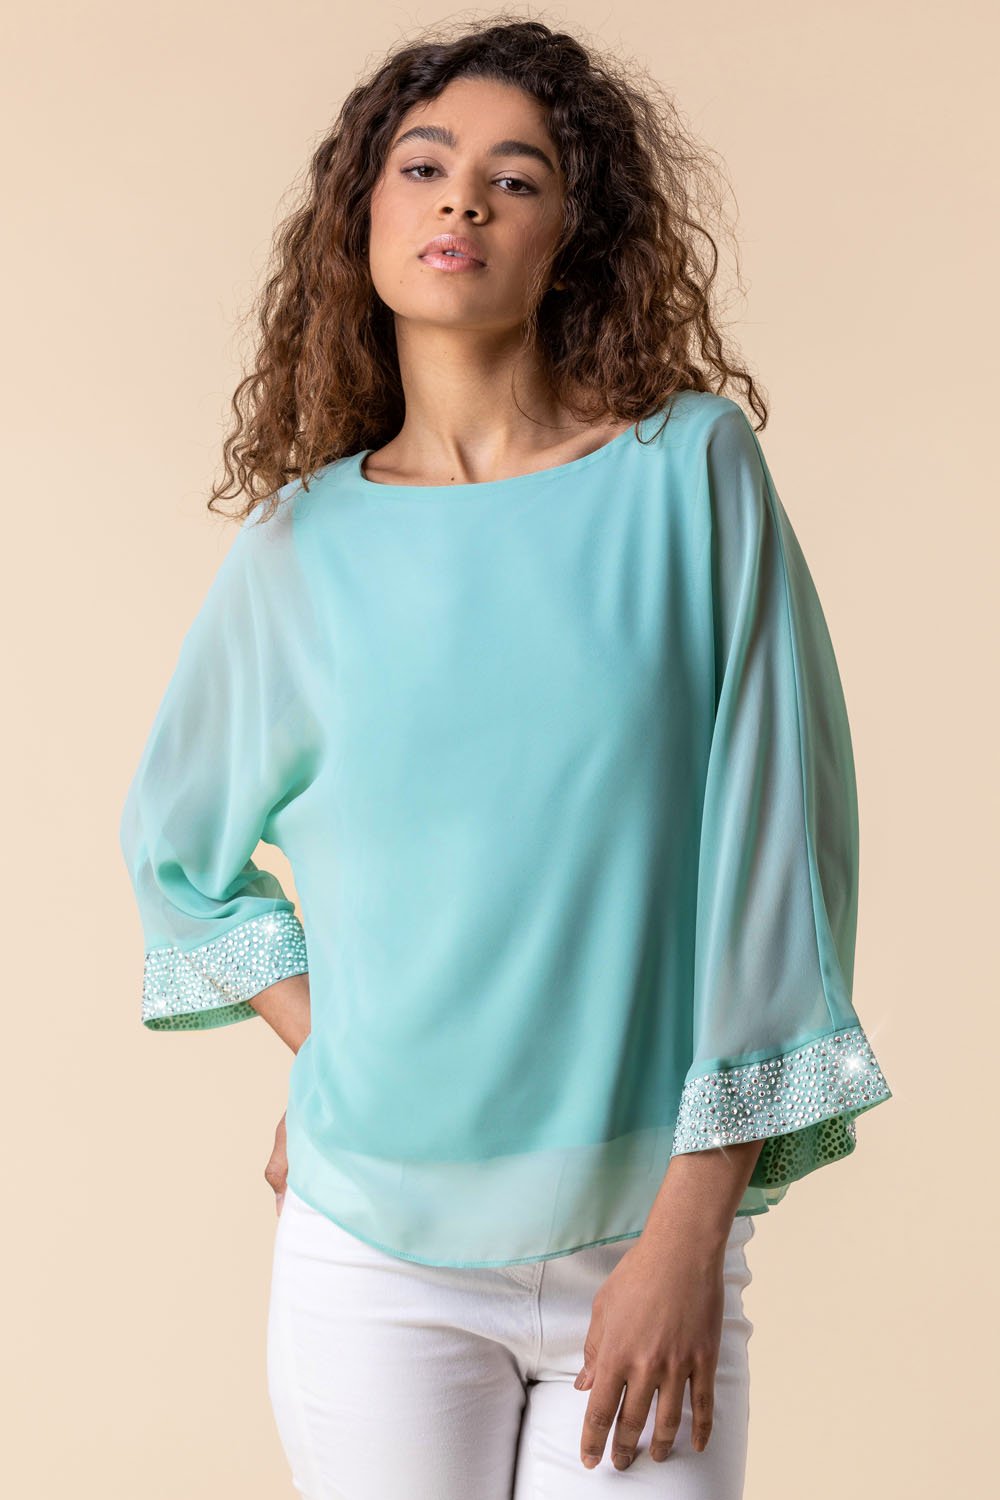 Mint Sparkle Embellished Cuff Top, Image 1 of 4